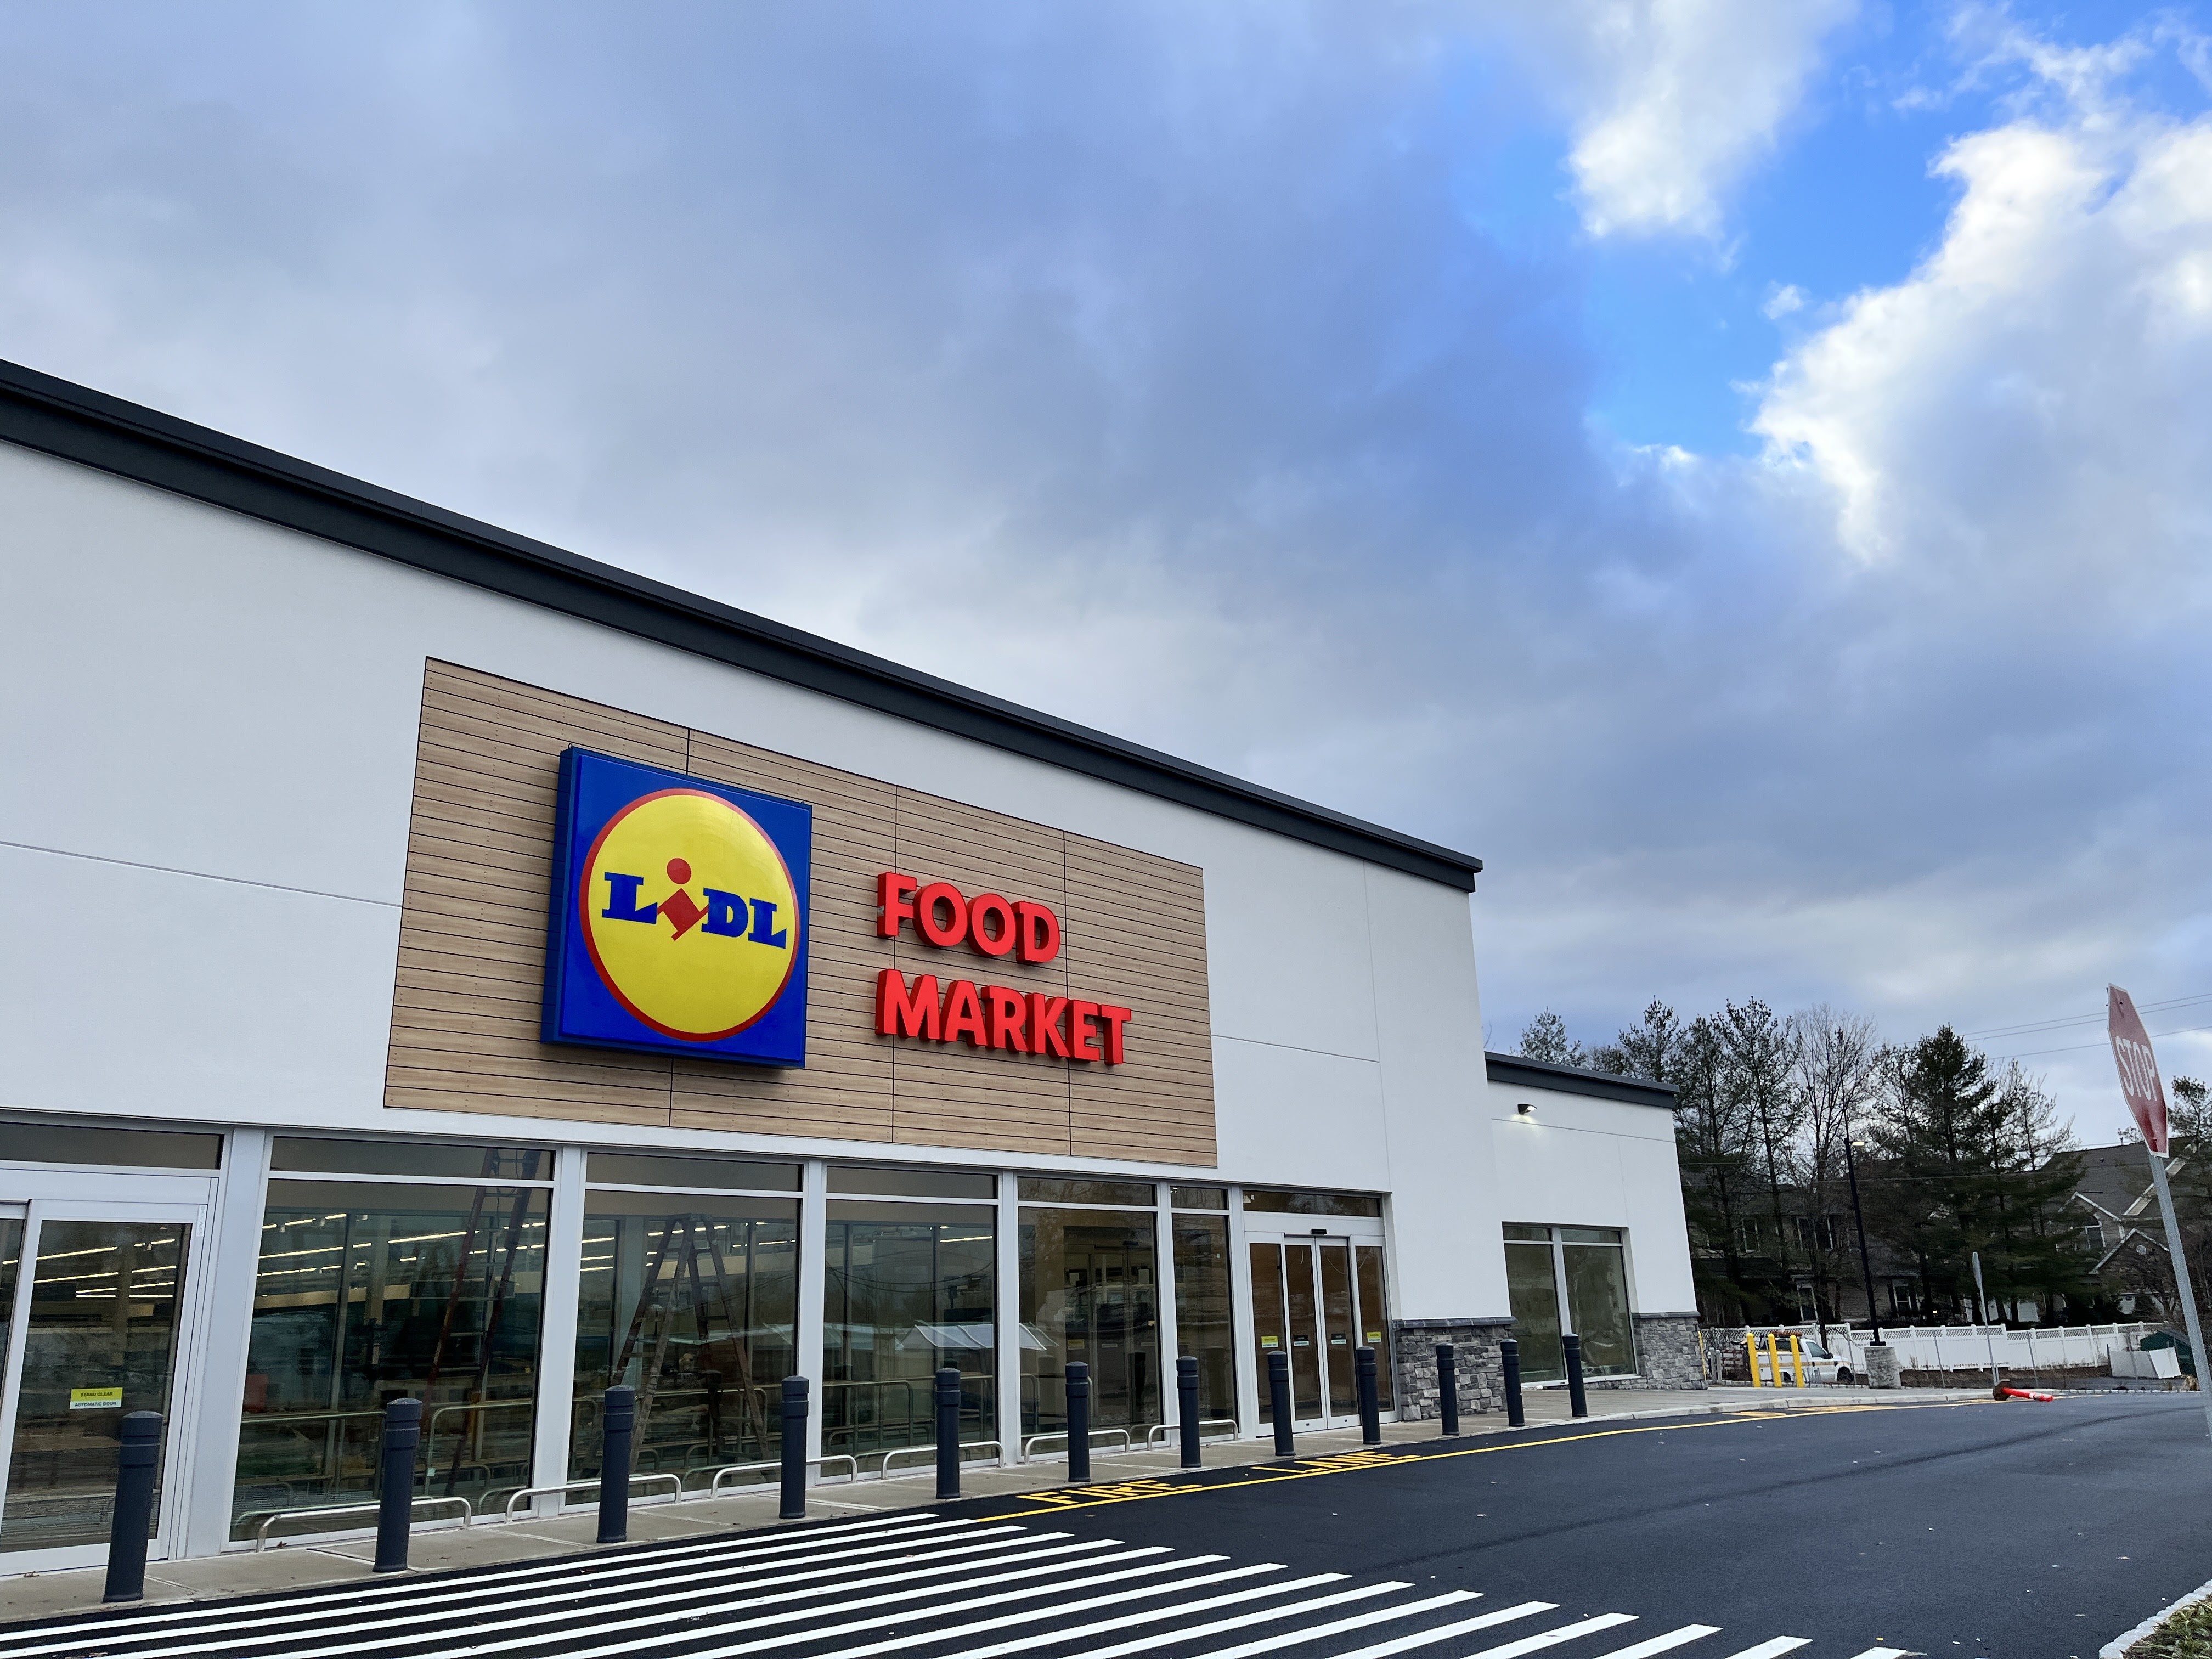 Opening date set for first Lidl store in Baltimore City